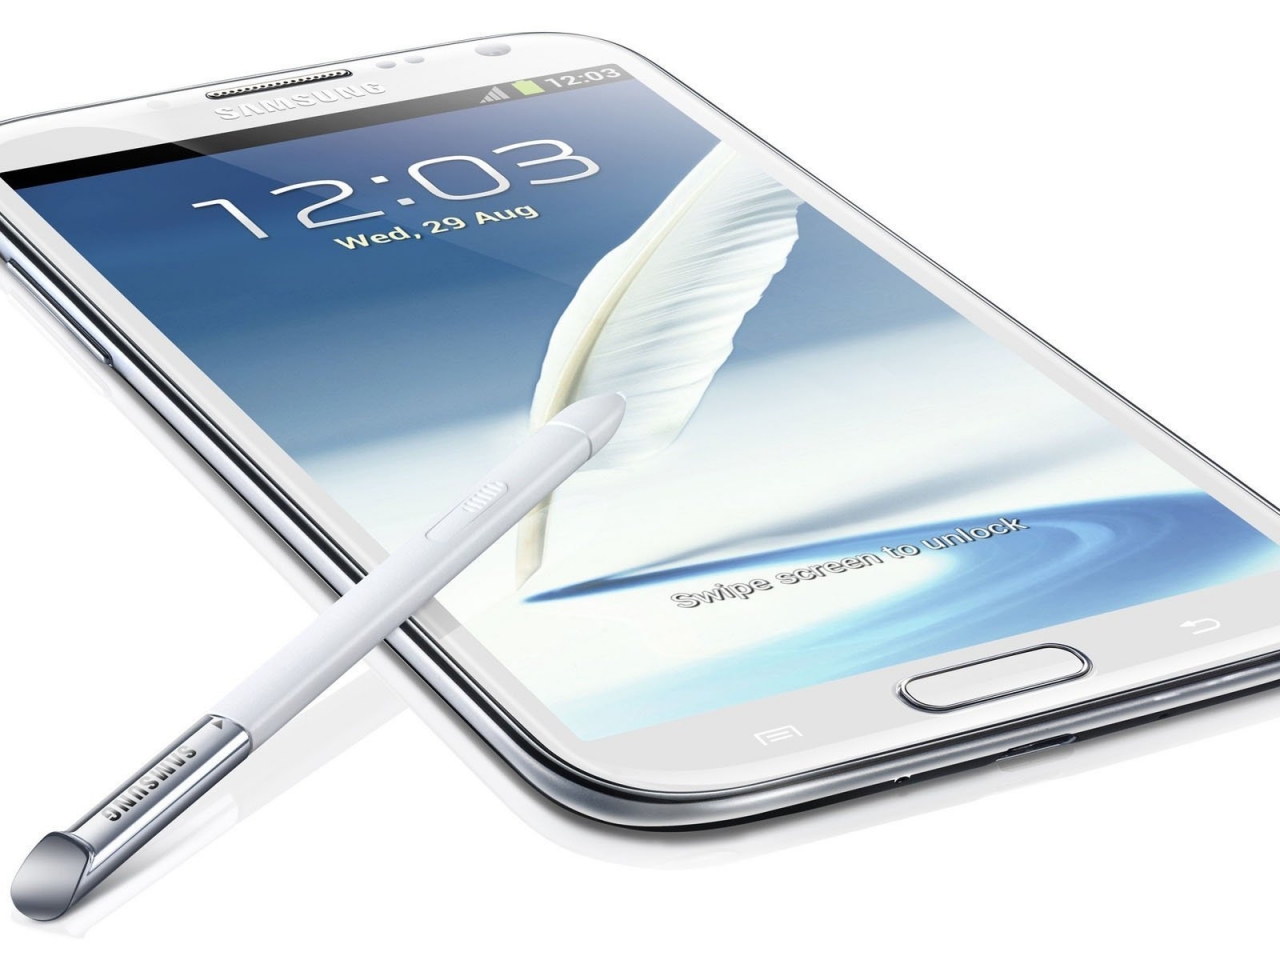 White Samsung Galaxy S3 for 1280 x 960 resolution